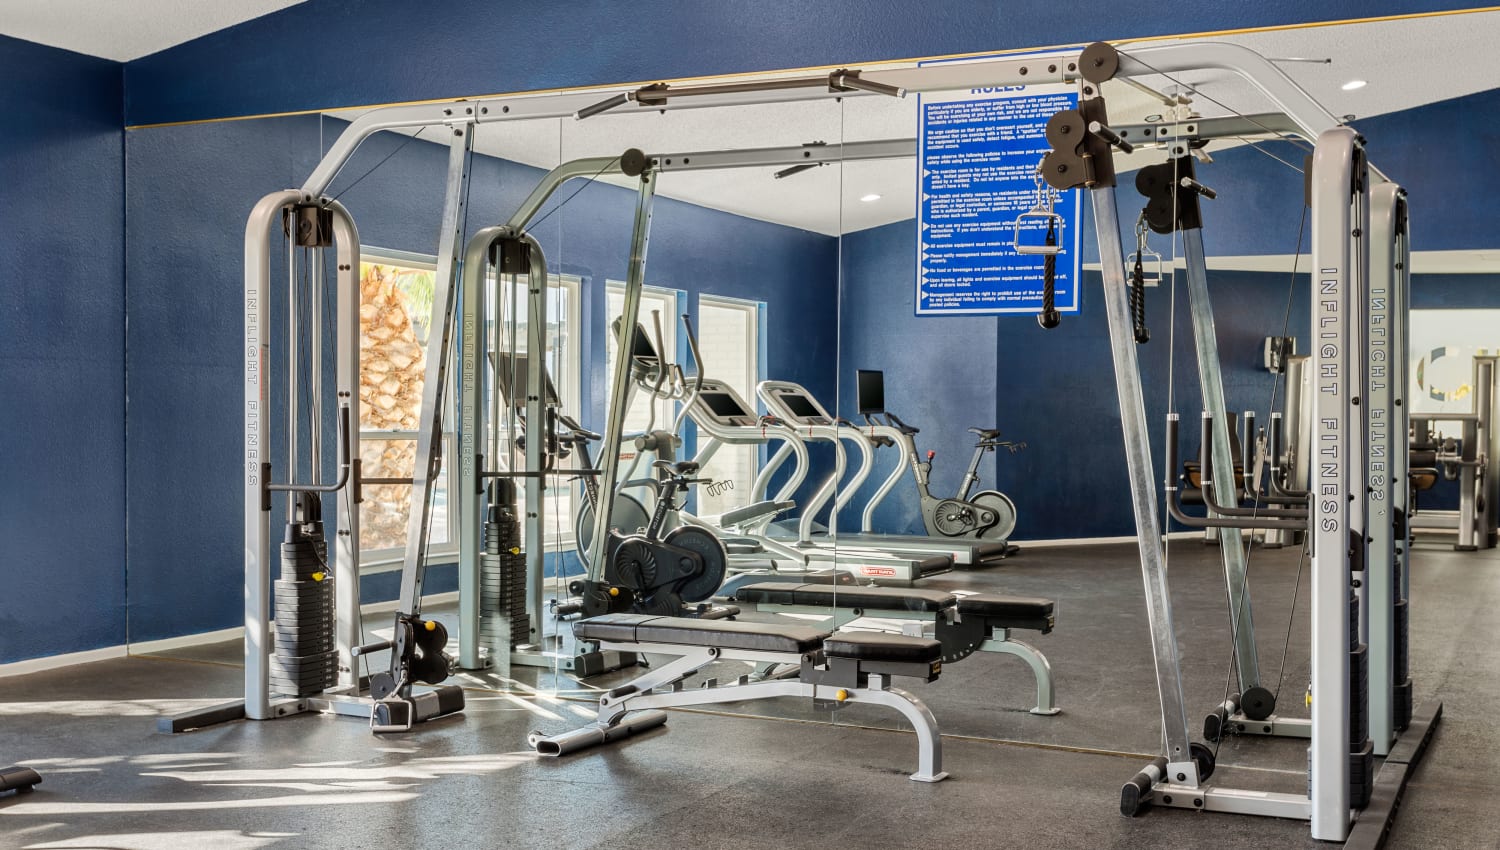 Well-equipped fitness center at Cielo on Gilbert in Mesa, Arizona